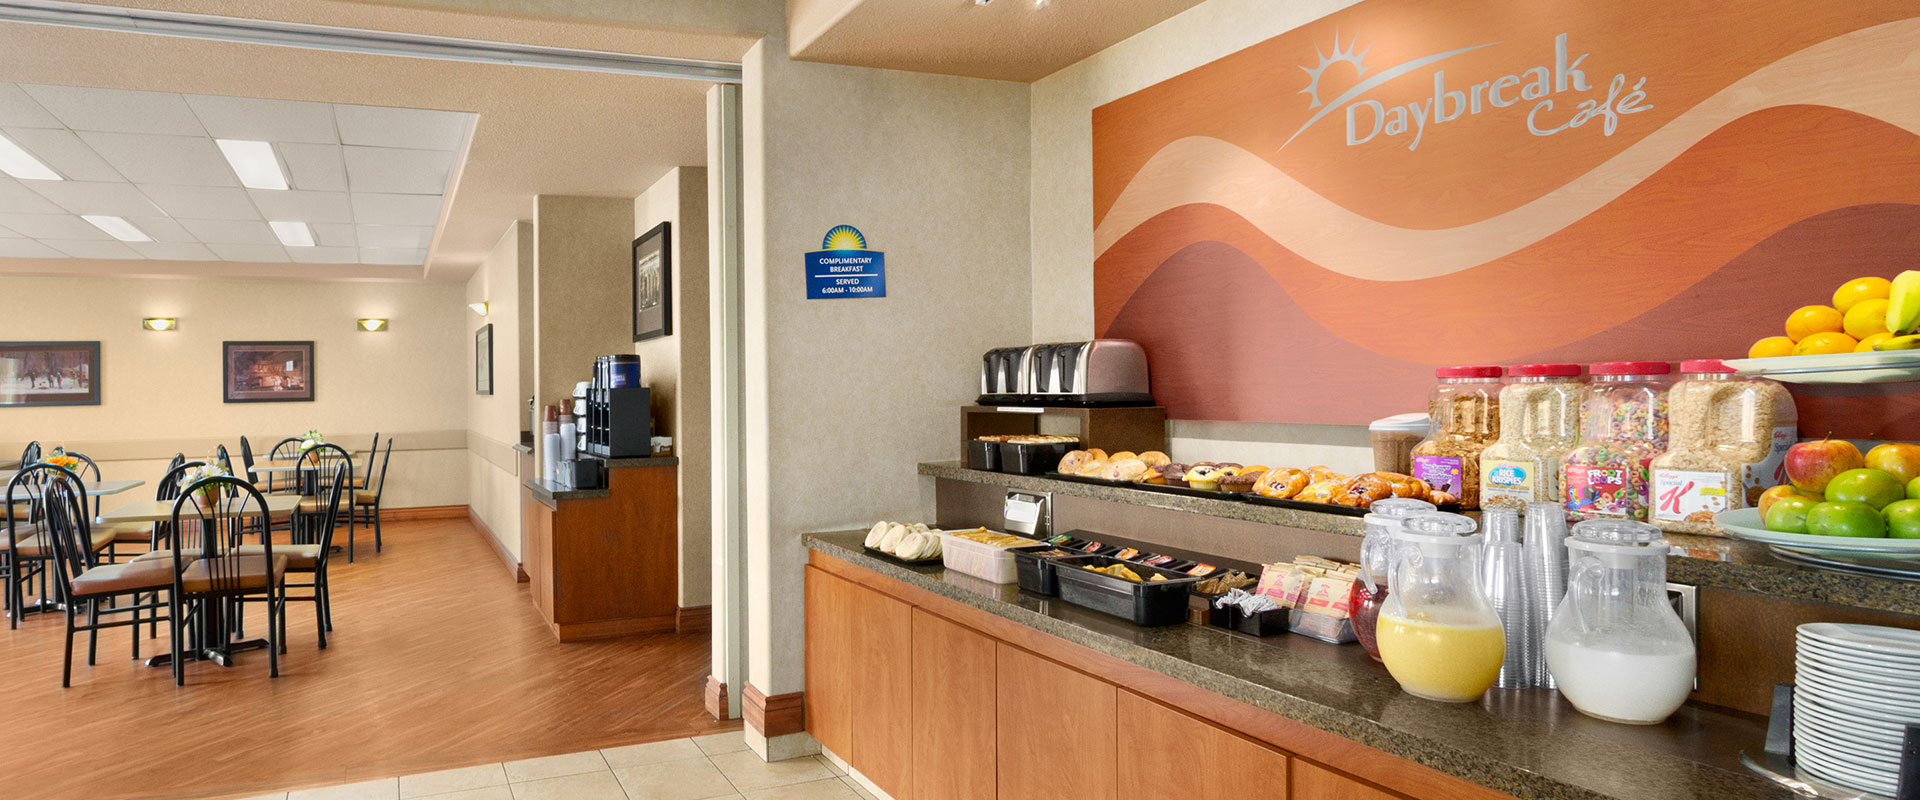 Large view of the breakfast bar at Days Inn Red Deer, Alberta stocked with muffins, danishes, cereals and beverages for guests.
